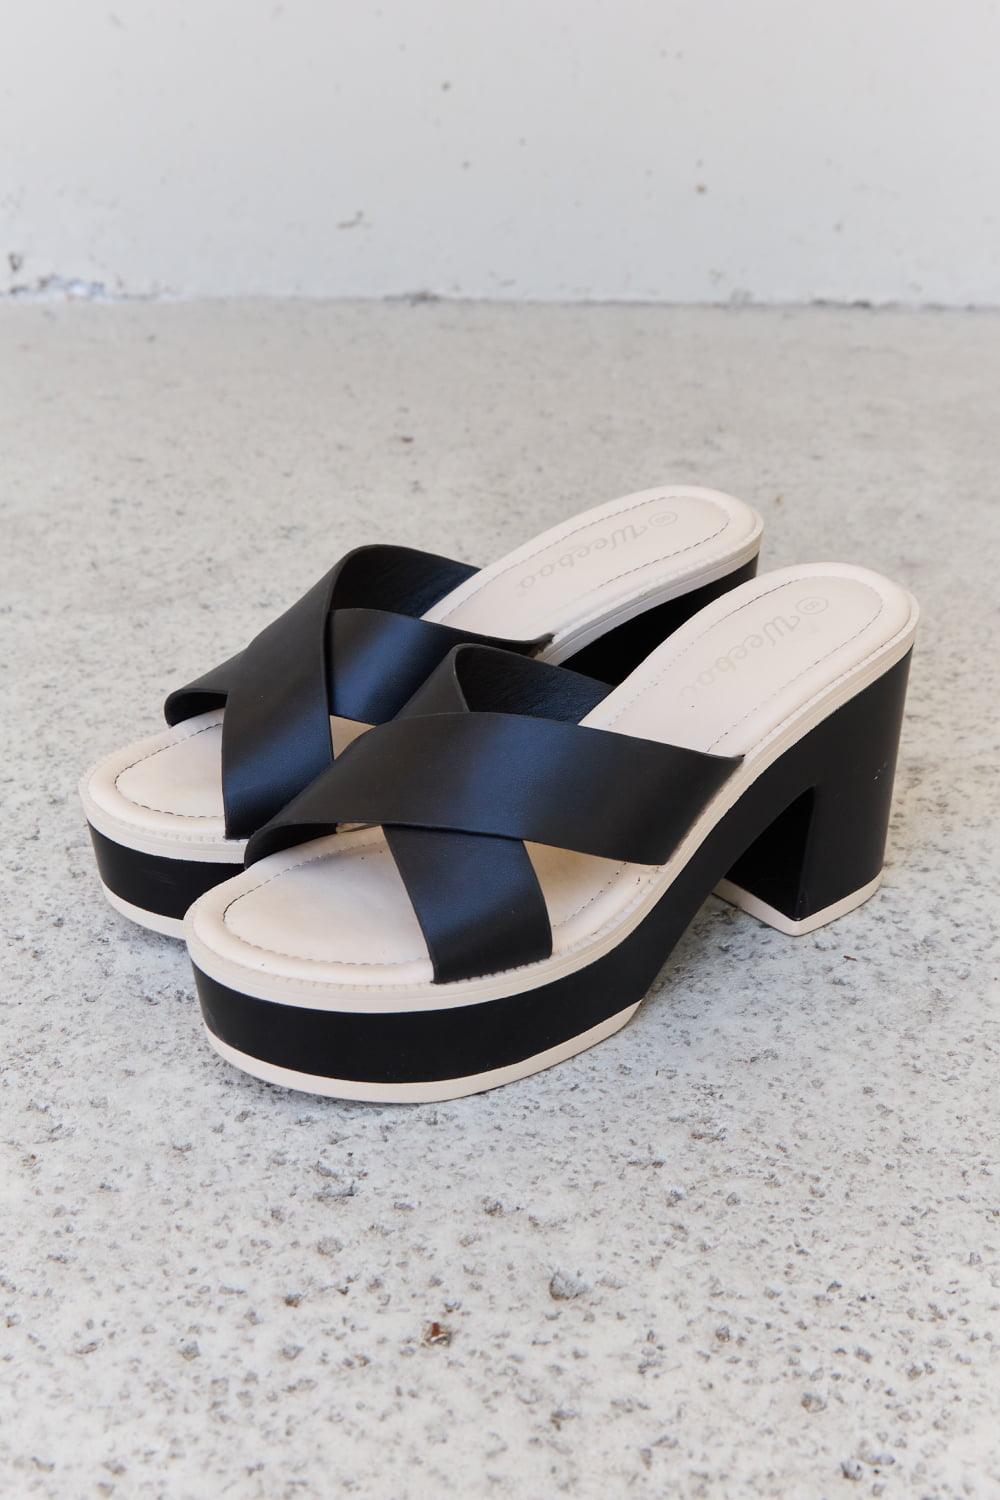 Weeboo Cherish The Moments Contrast Platform Sandals in Black - CADEAUME